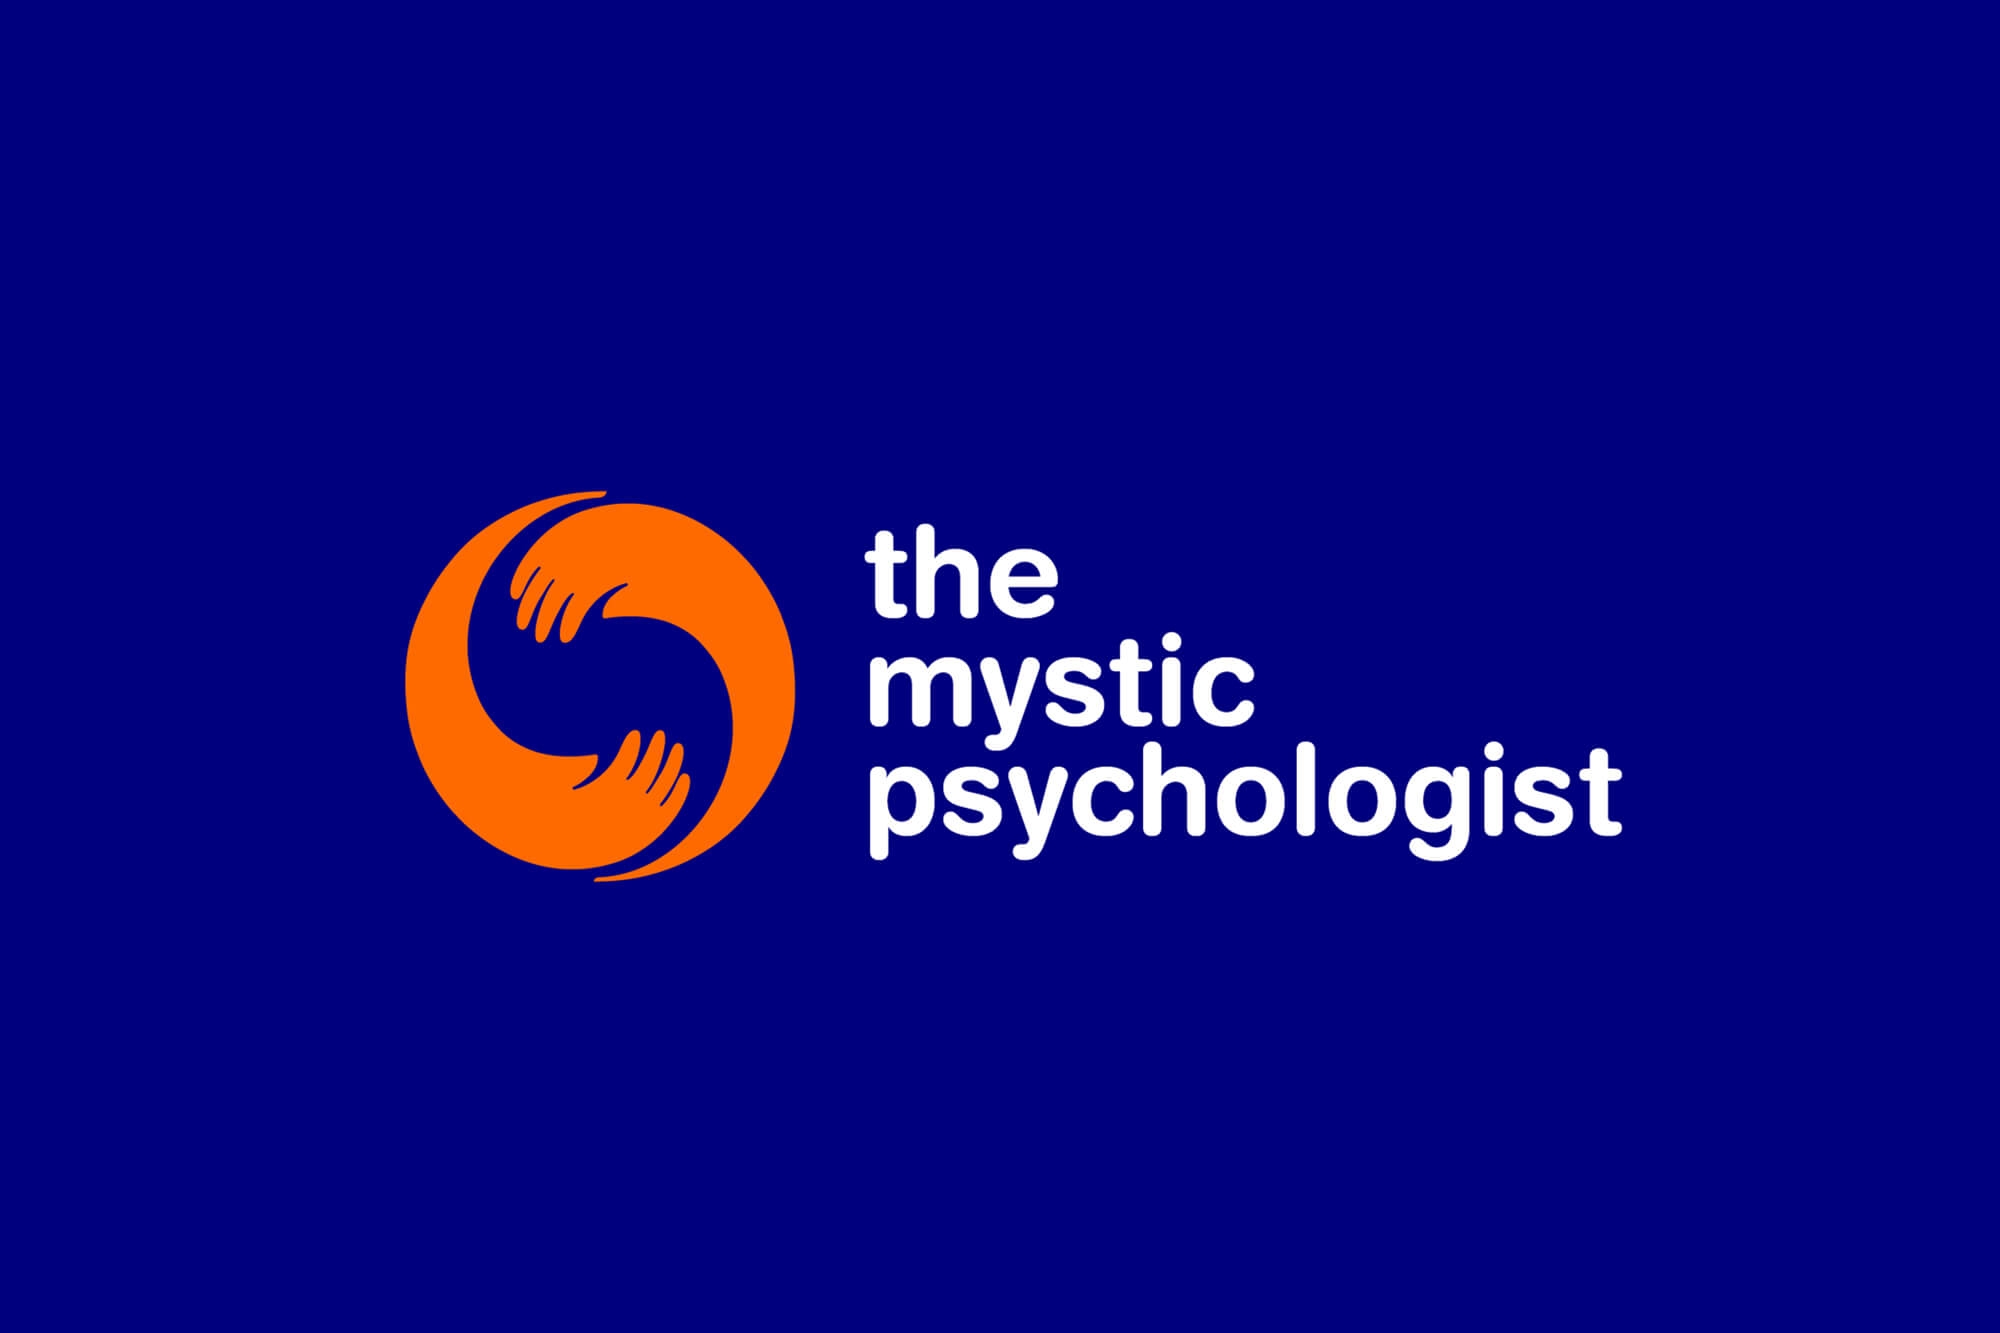 The Mystic Psychologist - The Company Research